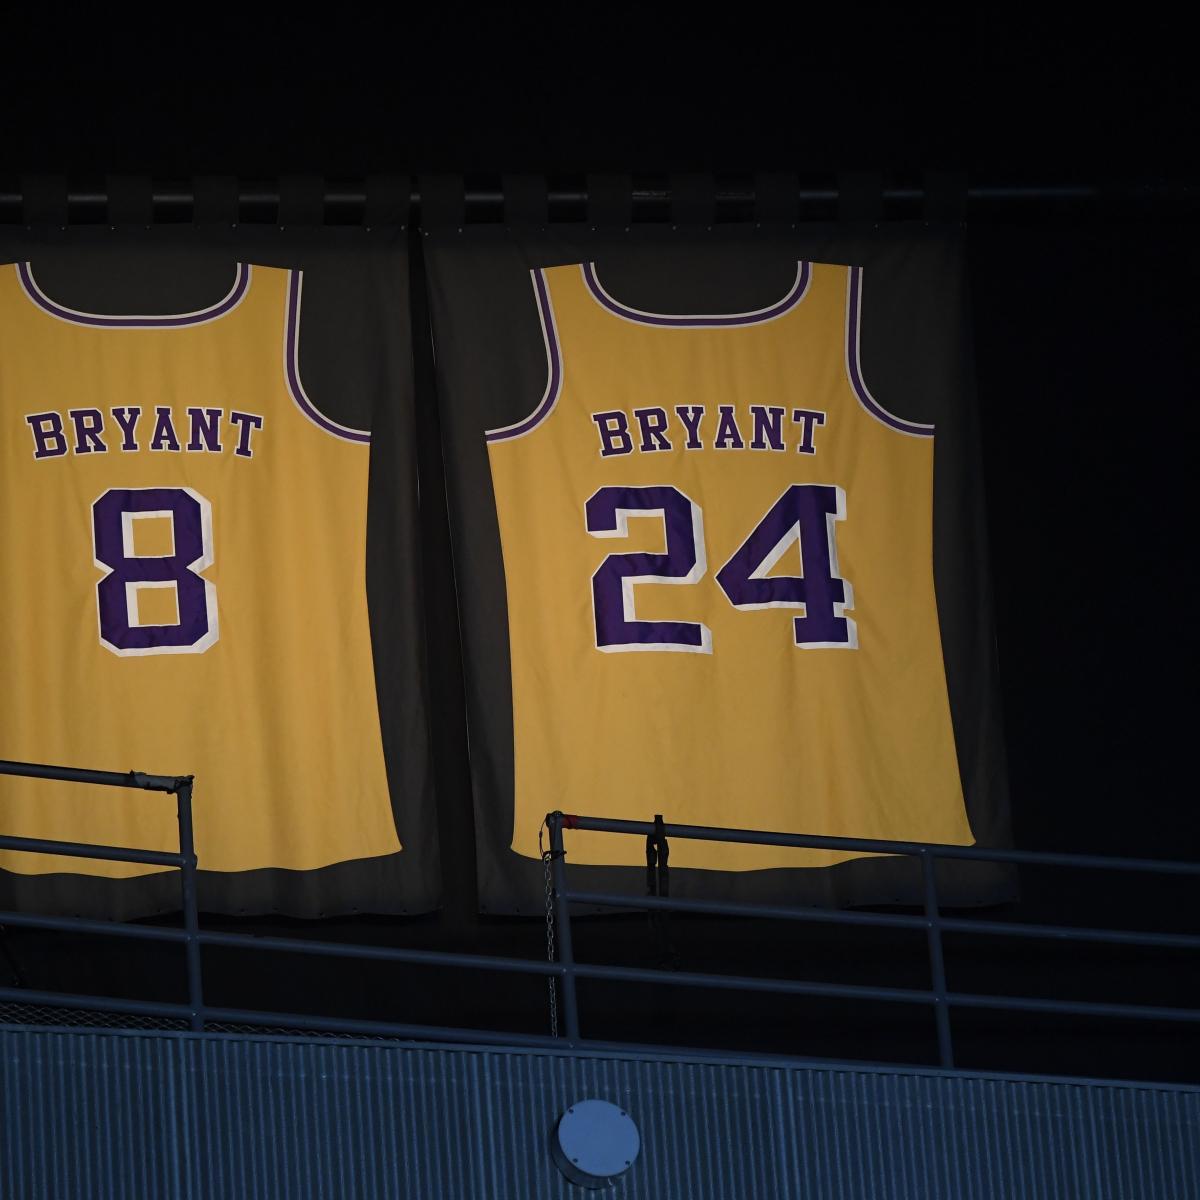 Lakers to retire Kobe Bryant's 2 jersey numbers in December